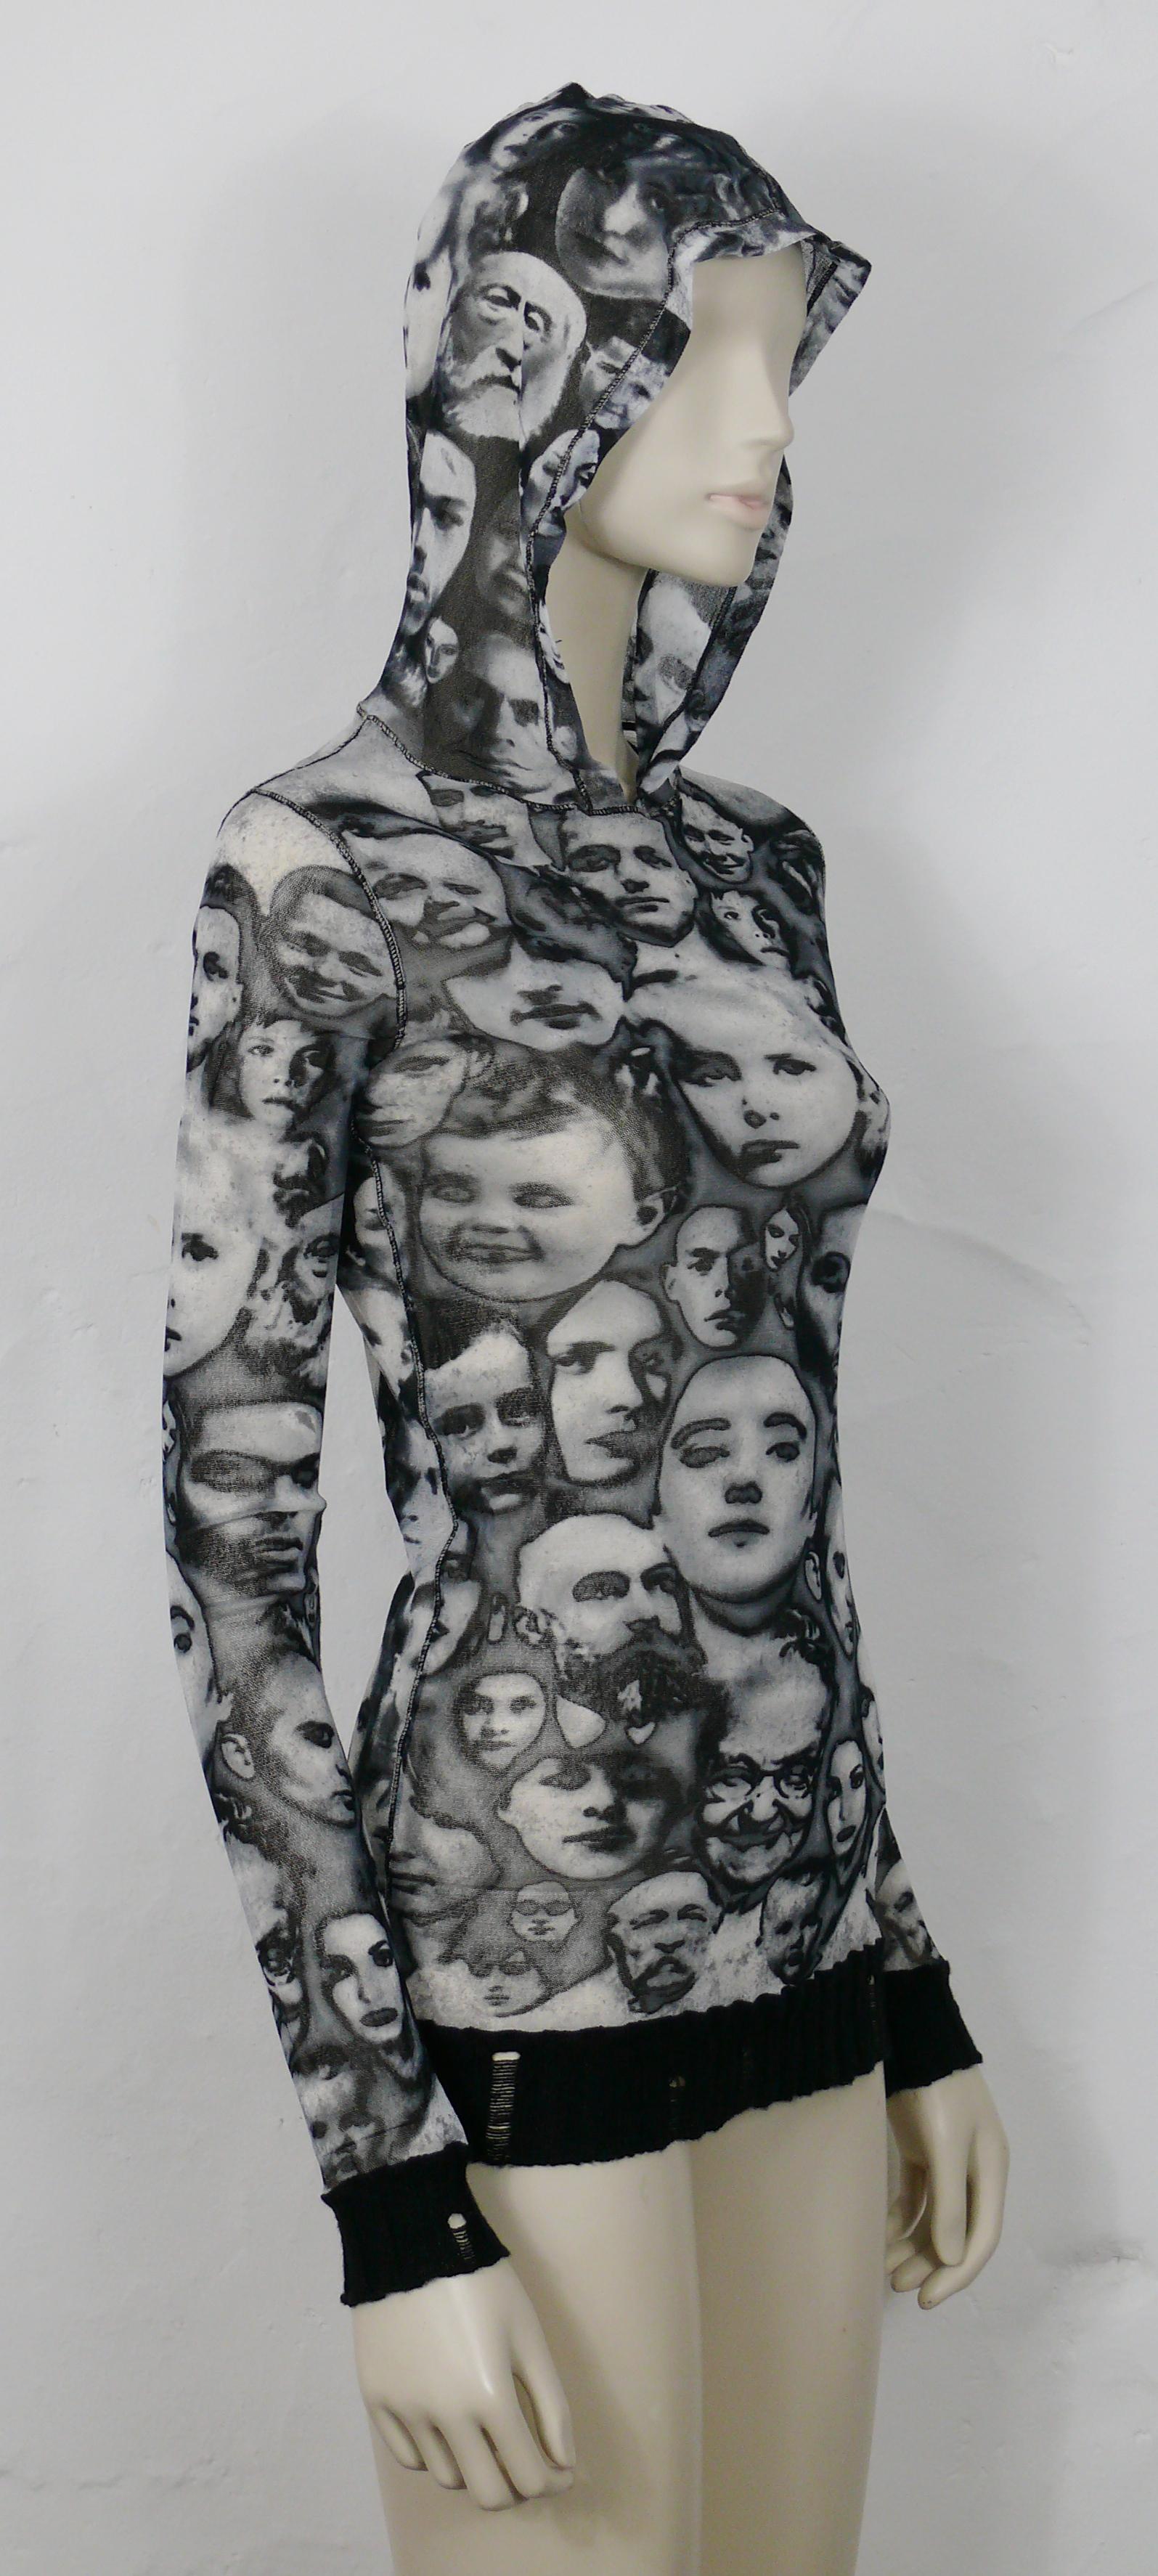 JEAN PAUL GAULTIER Maille Femme vintage iconic sheer mesh hooded top featuring a black and white faces print.

This top features :
- FUZZI sheer mesh in black and white featuring an iconic faces print all-over.
- Long sleeves.
- Hood.
- Exposed